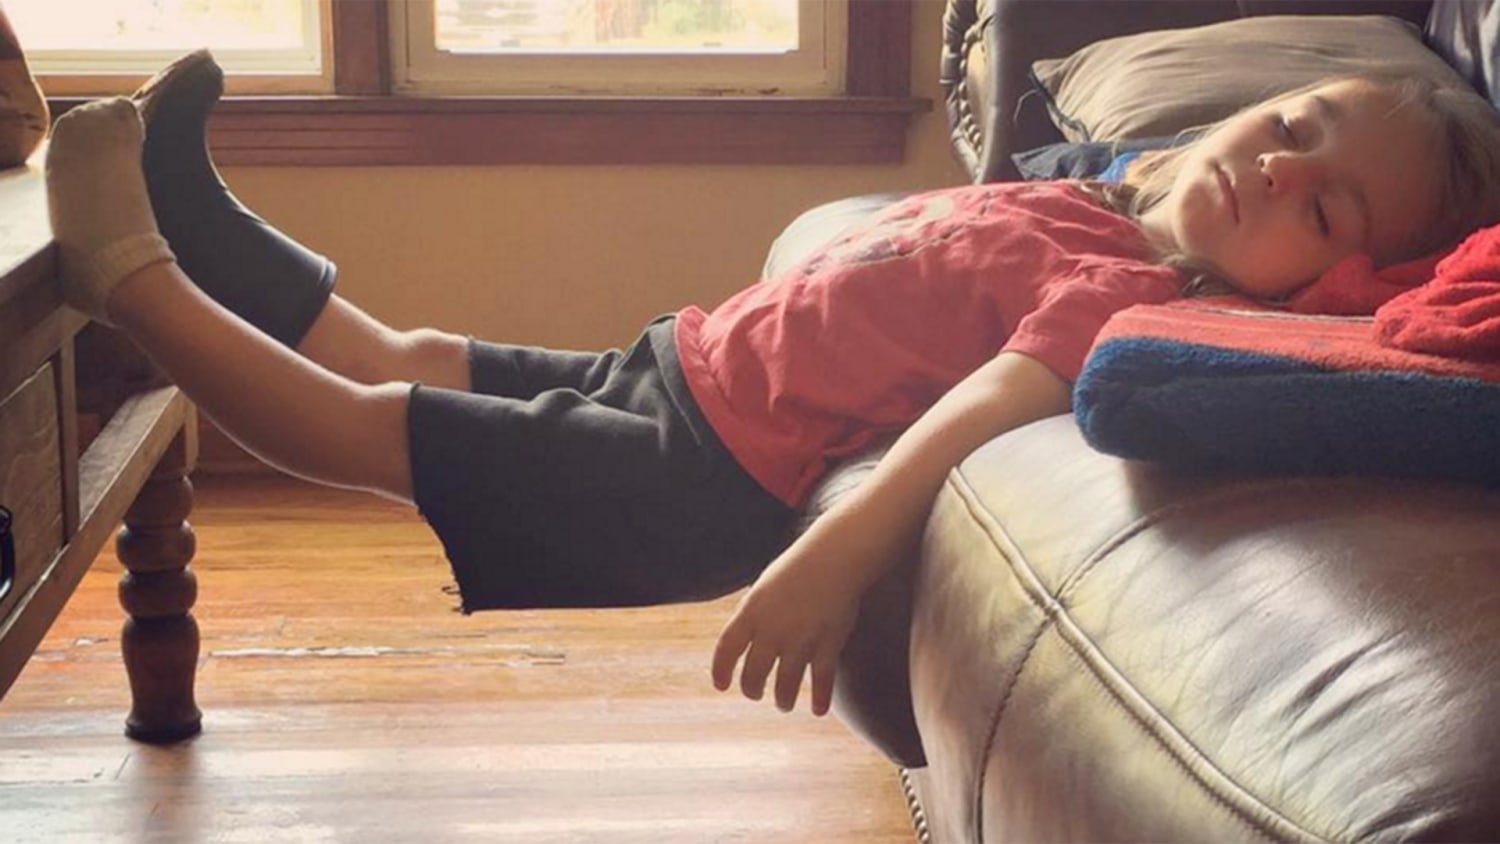 15 funniest places where kids have fallen asleep: That can't be comfortable!